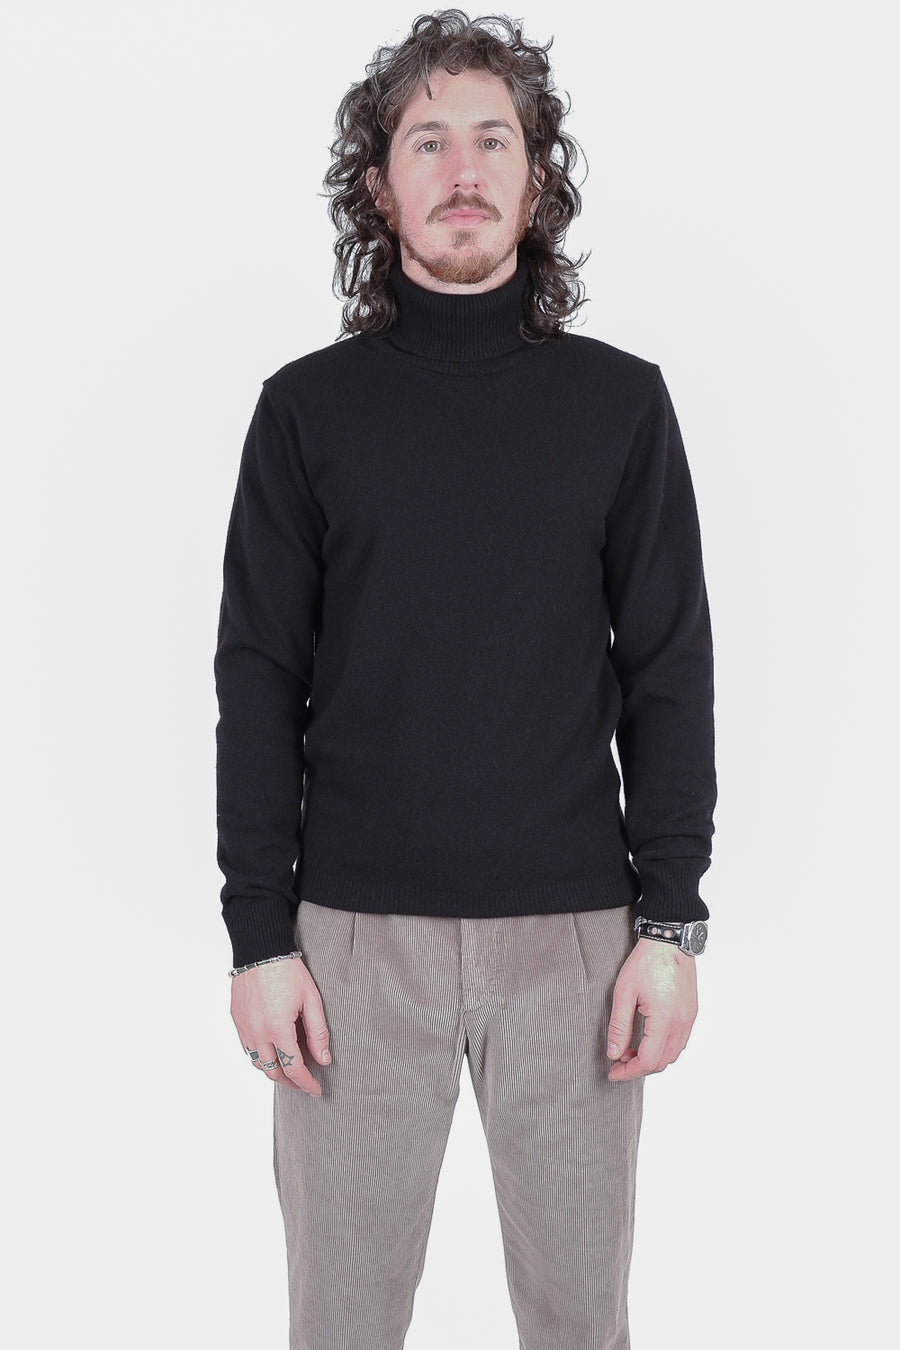 Buy the Daniele Fiesoli Roll Neck Sweater in Black at Intro. Spend £50 for free UK delivery. Official stockists. We ship worldwide.